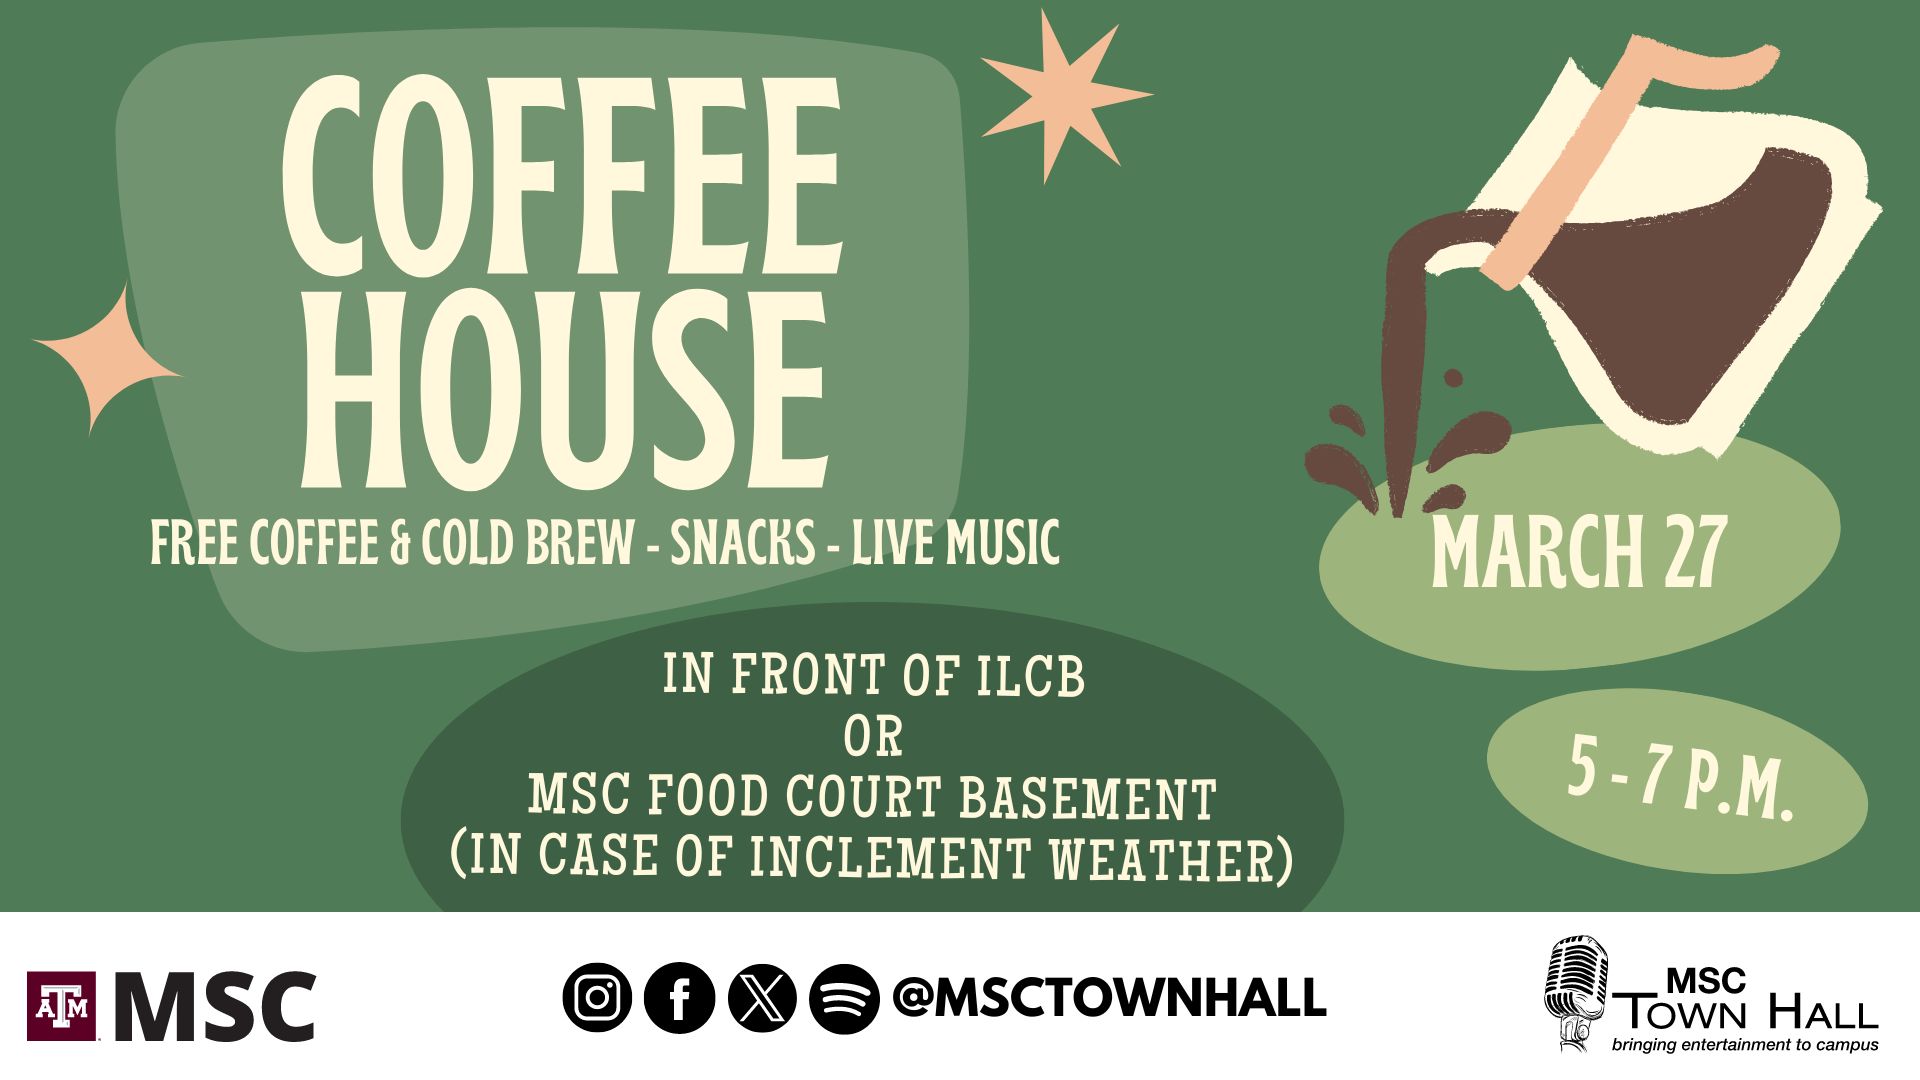 MSC Town Hall Presents CoffeeHouse, March 27 from 5 to 7 p.m. in front of ILCB or MSC Food Court Basement (In case of inclement weather). Free Coffee and Cold Brew, snacks and live music. Instagram , Facebook, Twitter, Spotify @msctownhall